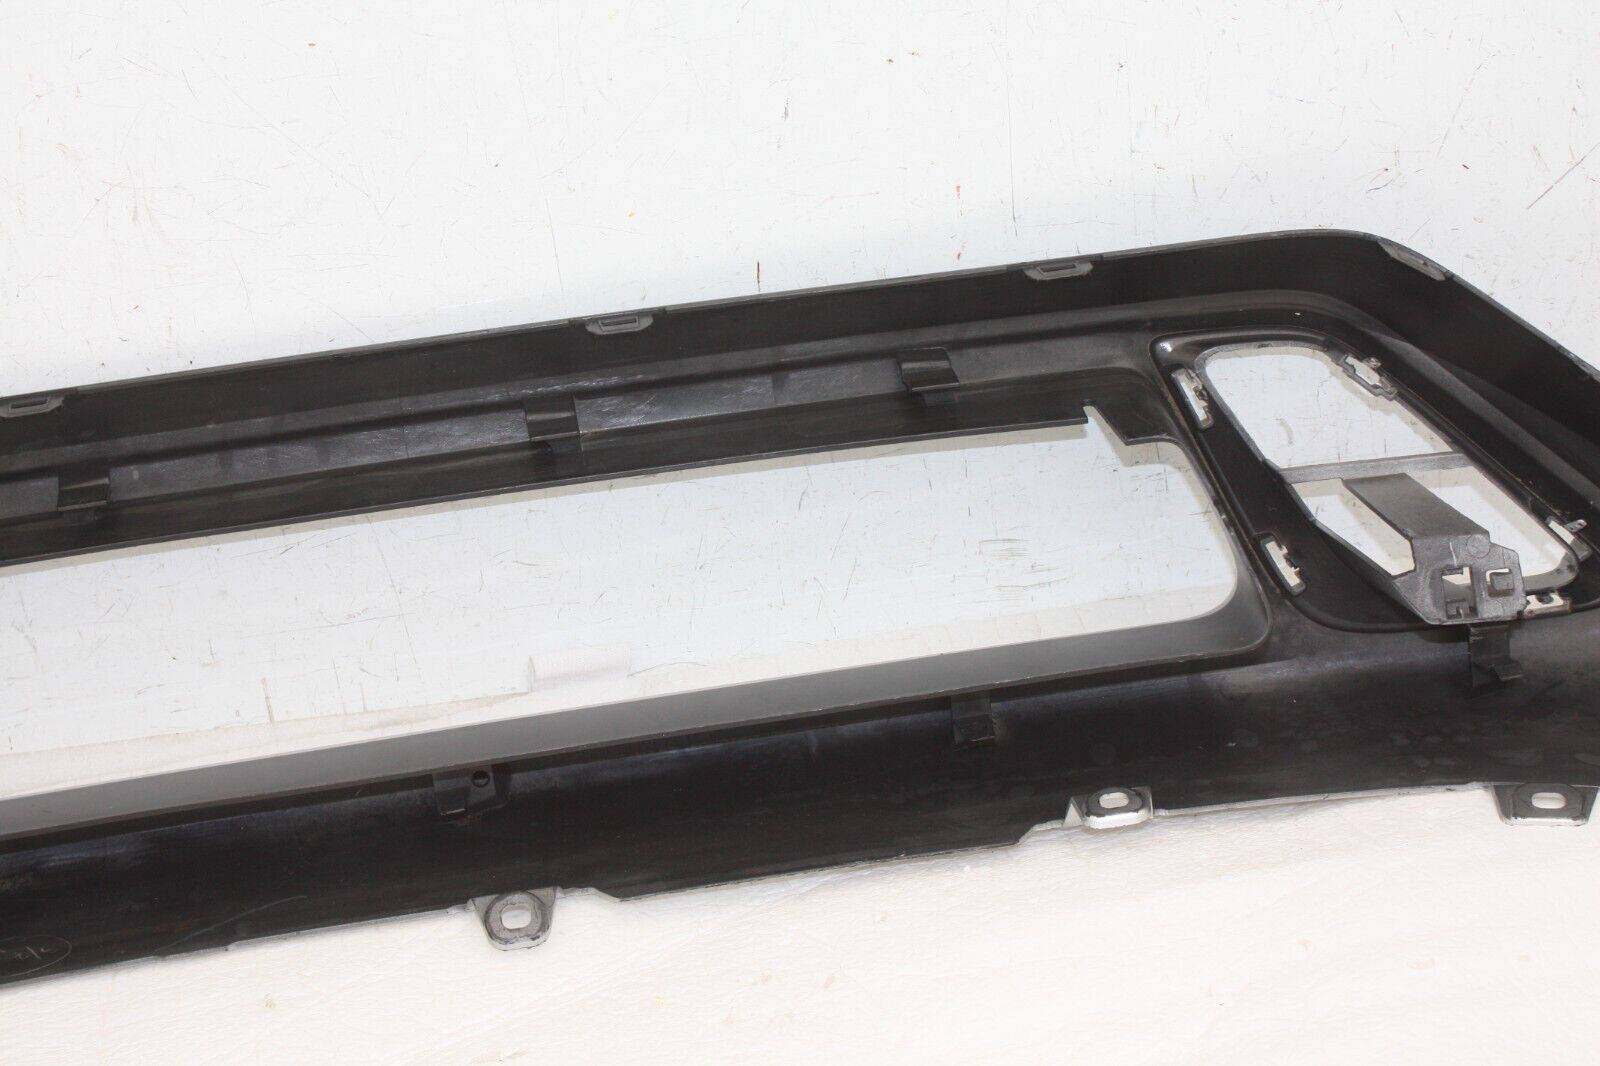 Mitsubishi-Outlander-Front-Bumper-Lower-Section-2018-TO-2021-6405A269-DAMAGED-176393343790-19